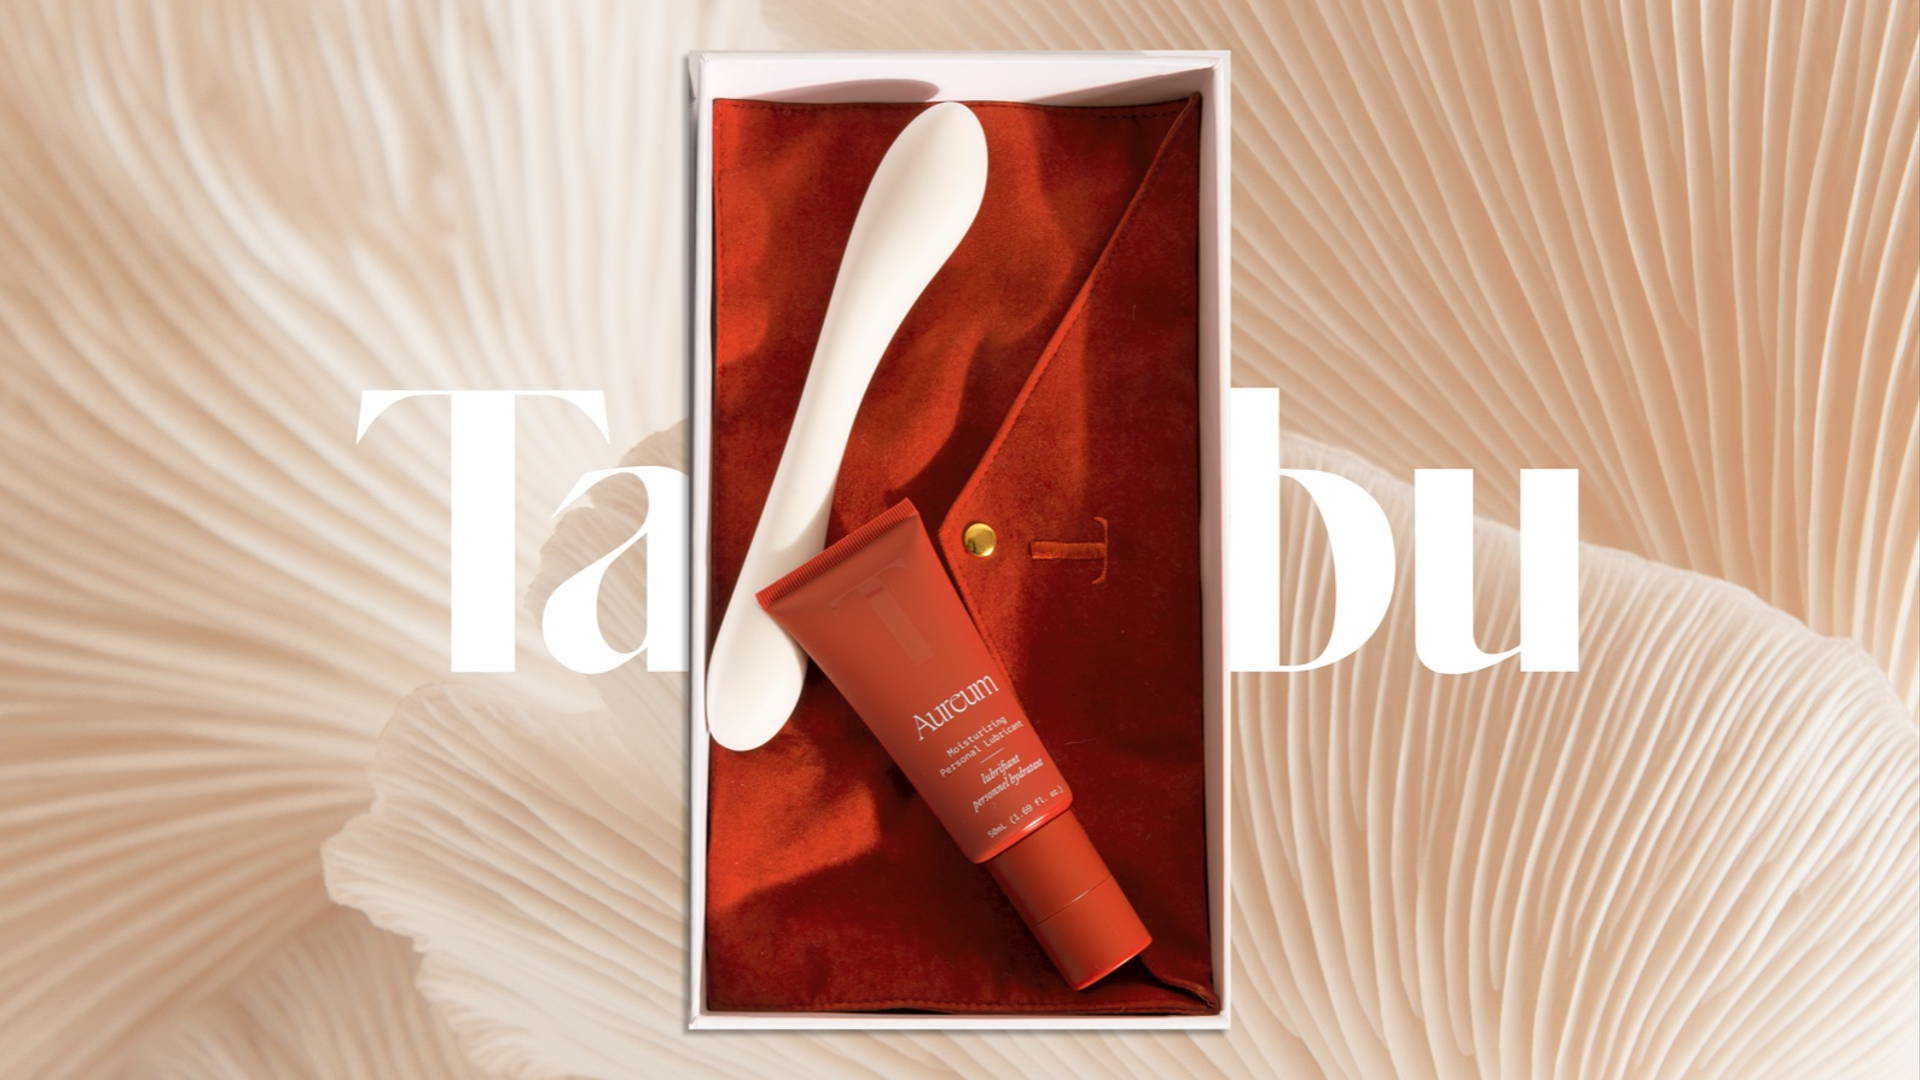 Featured image for Tabu Empowers Women Over 50 To Reclaim Their Sex Lives (and They Get Some Elegant Packaging To Boot)